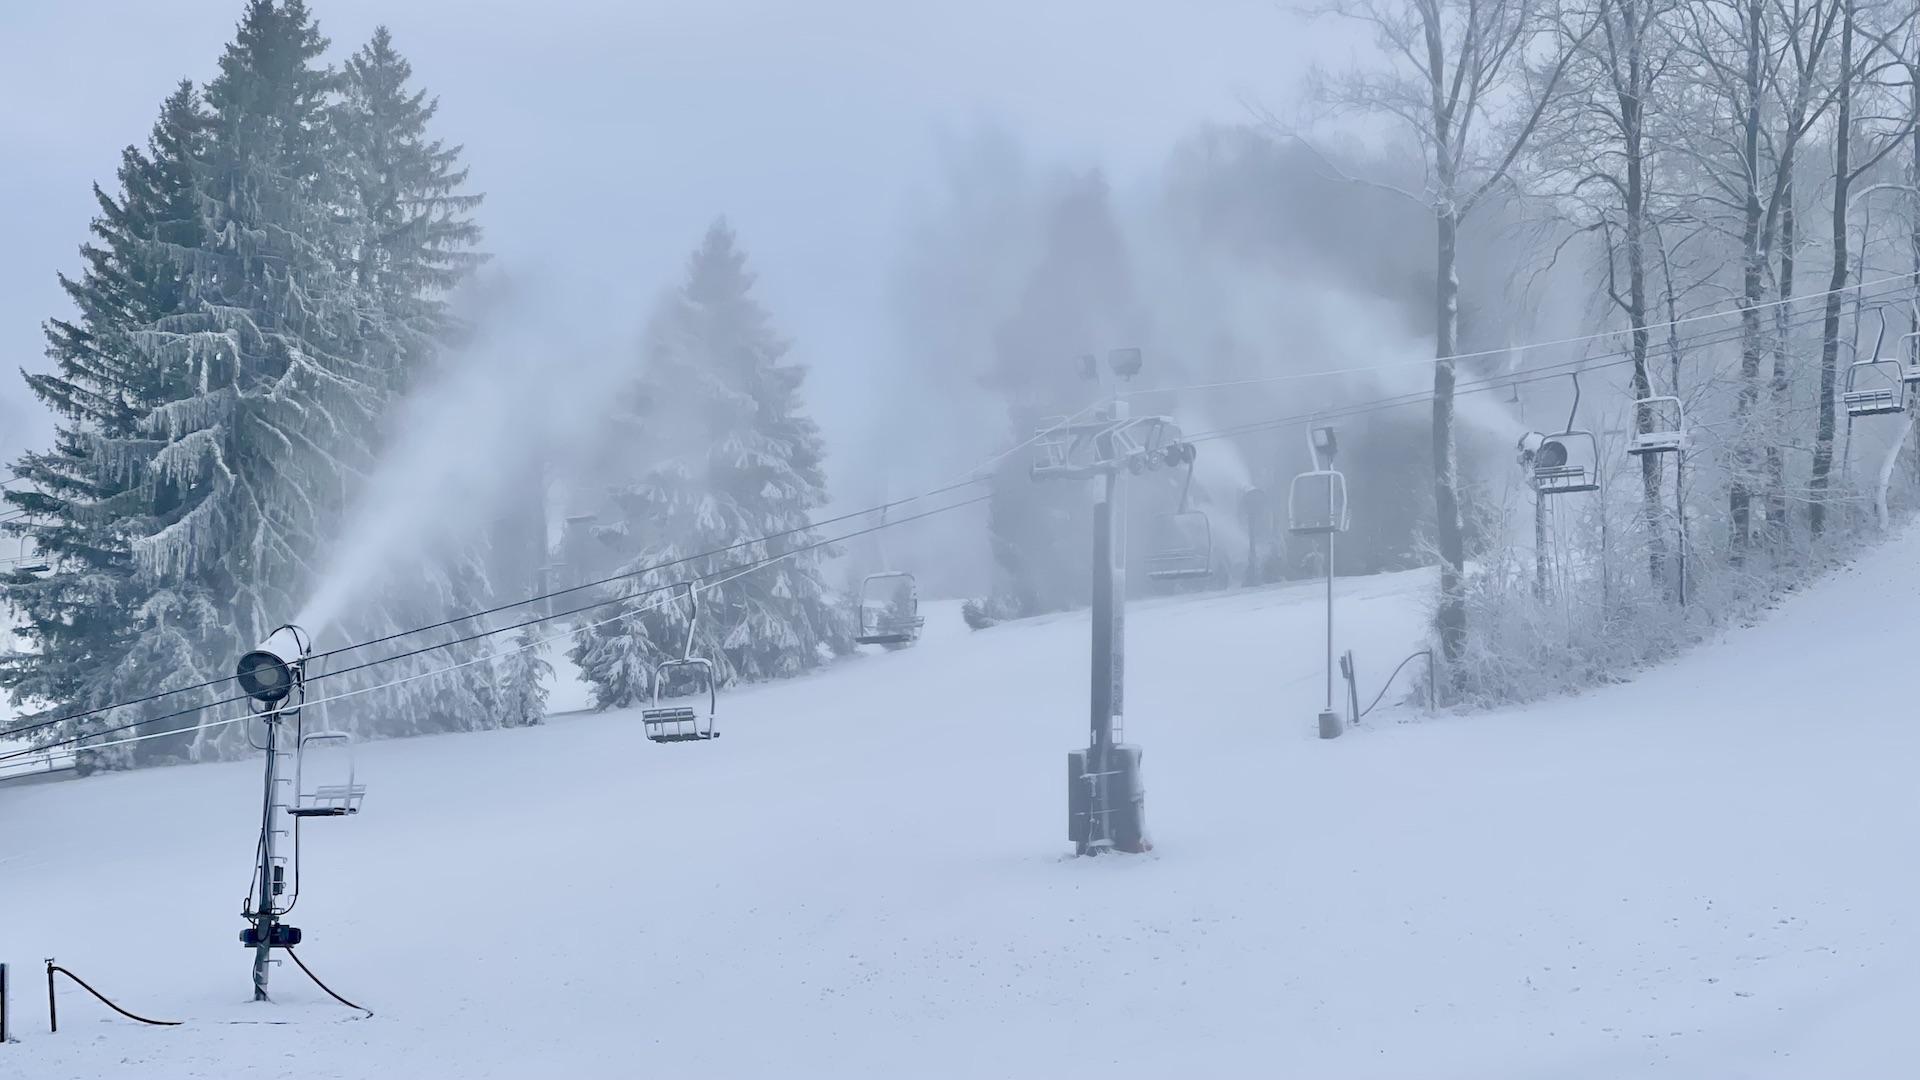 Reopening For Skiing and Snowboarding This Friday, January 5th